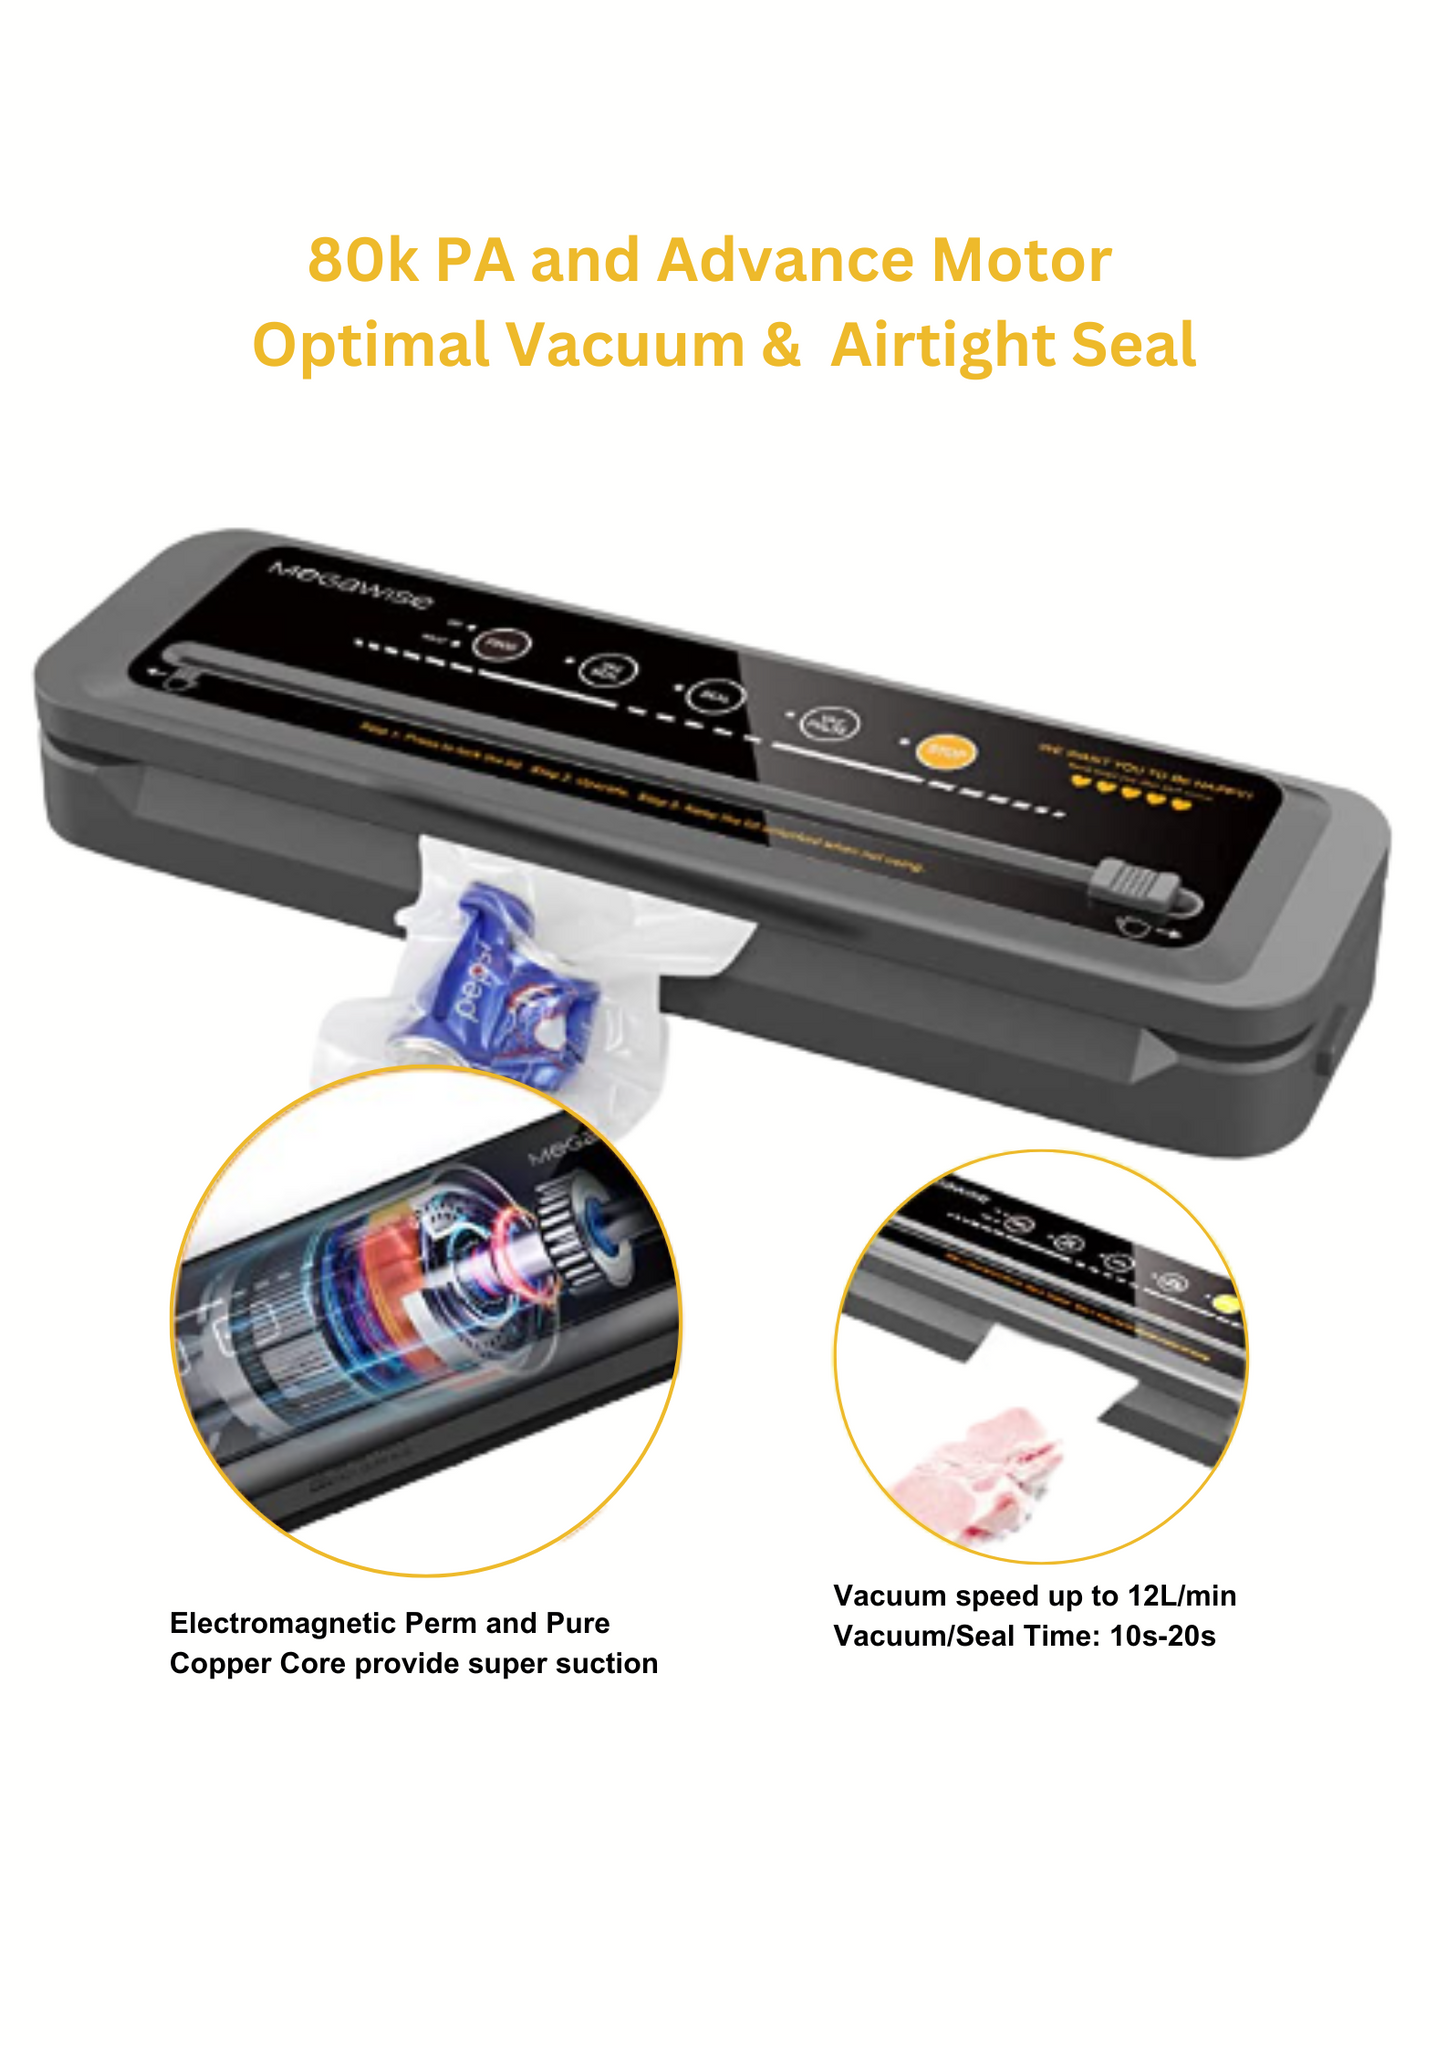 Food Saver Vacuum Sealer Machine,80 Kpa Powerful Suction,5-in-1 Automatic  Compact Vacuum Food Preservation System,Easy to Operate, Suitable for